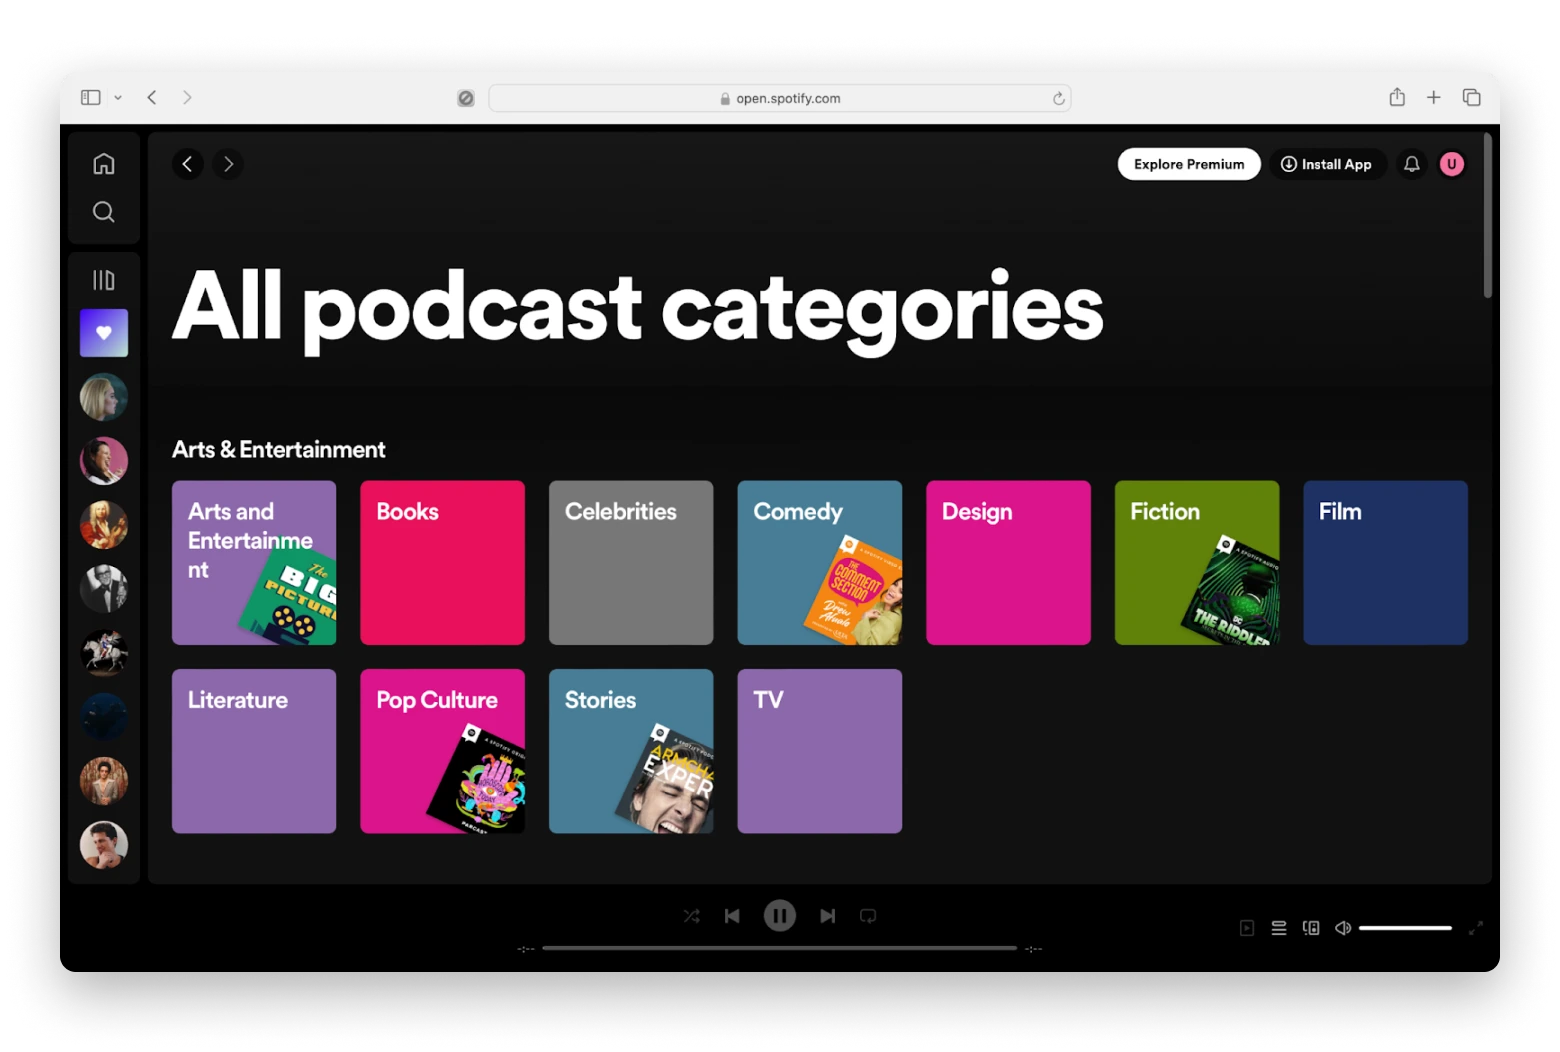 Spotify: All podcast categories